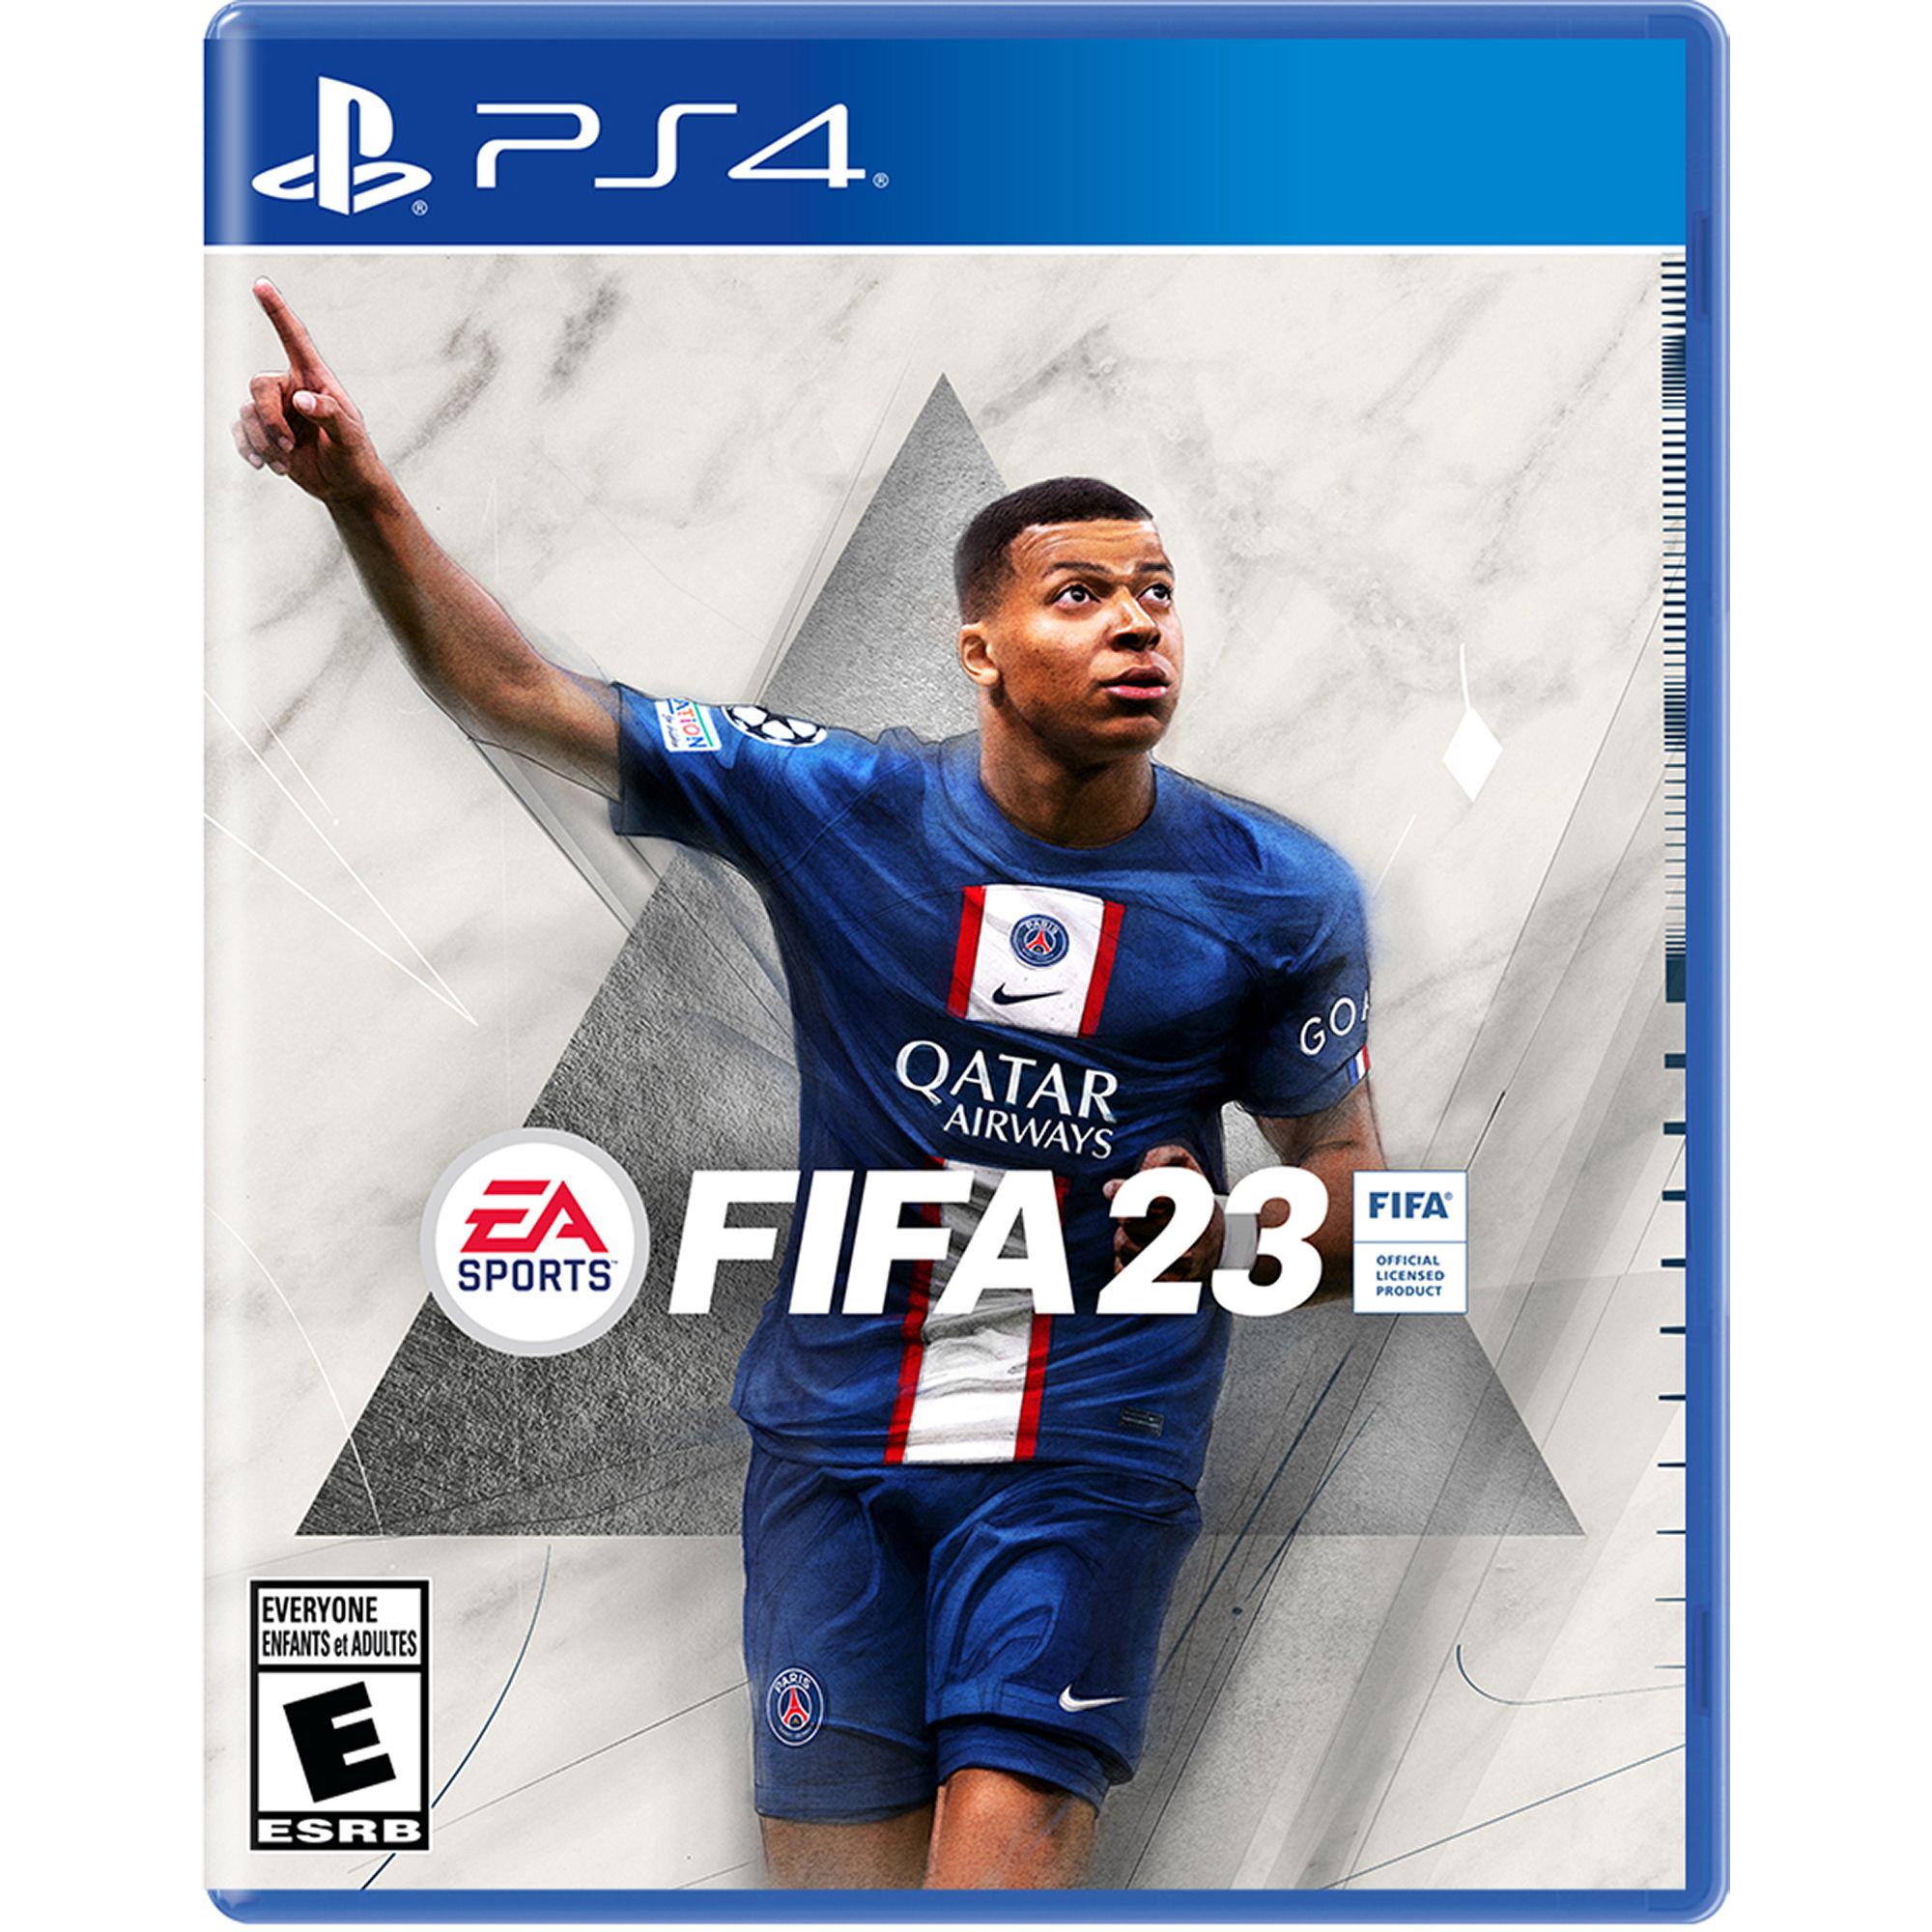 Ps4 fifa 23 brand new will be available on 30th Sep at active games 96B  church street Mayfair jhb - Video Games - Johannesburg, Facebook  Marketplace